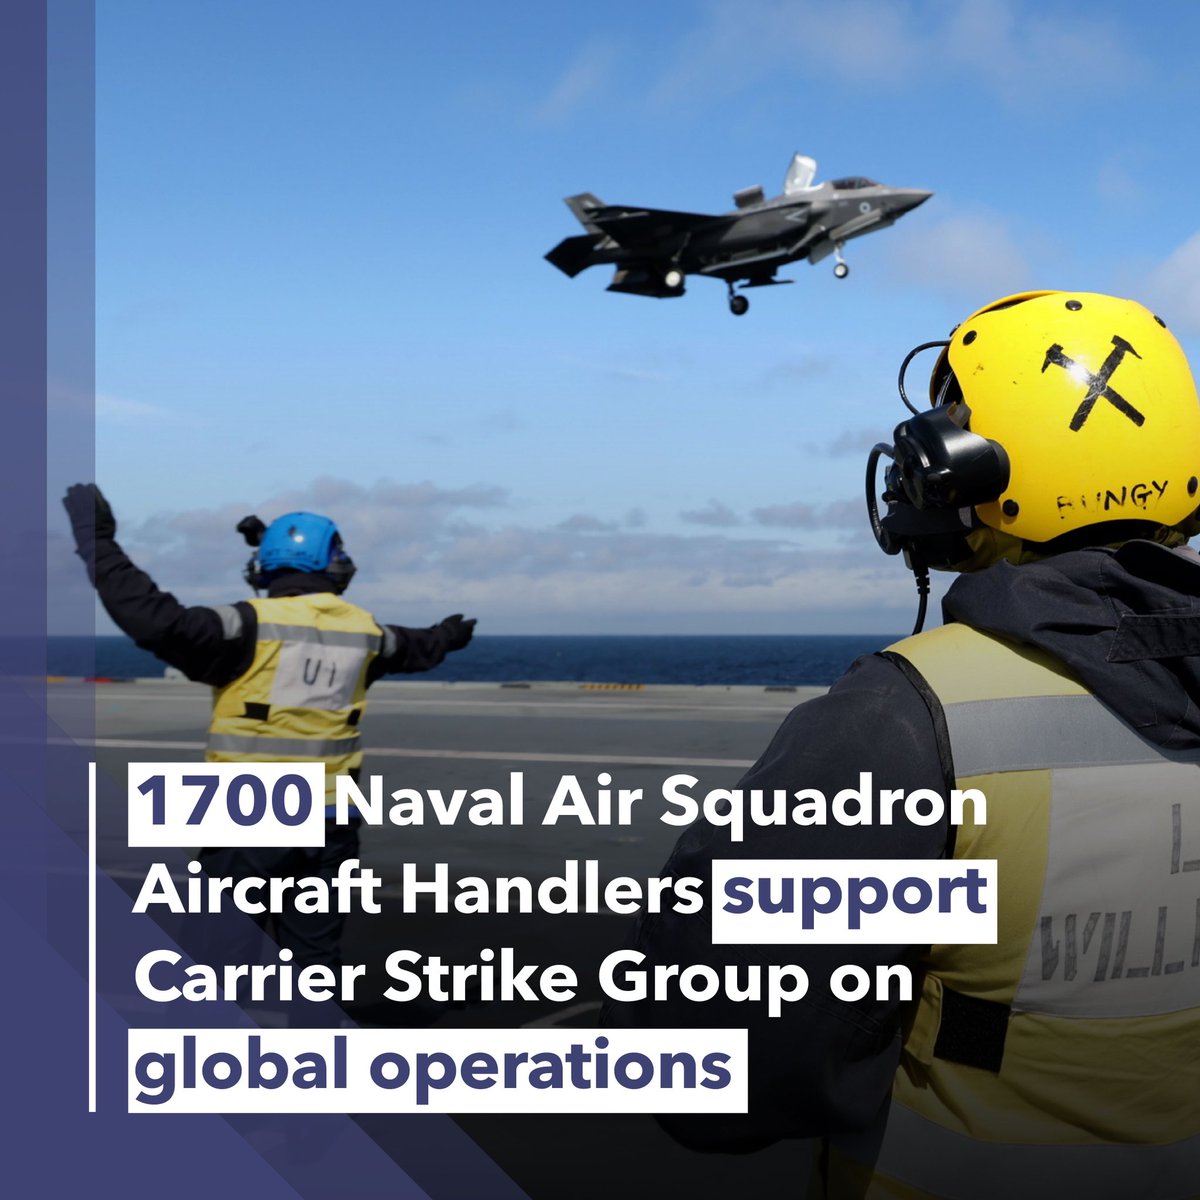 At the heart of the @RoyalNavy’s global fighting strength is the Carrier Strike Group. Aircraft handlers with 1700 Naval Air Squadron join those on the aircraft carriers to directly allow F35 jet operations #1700NAS @1700NAS #TeamCuldrose